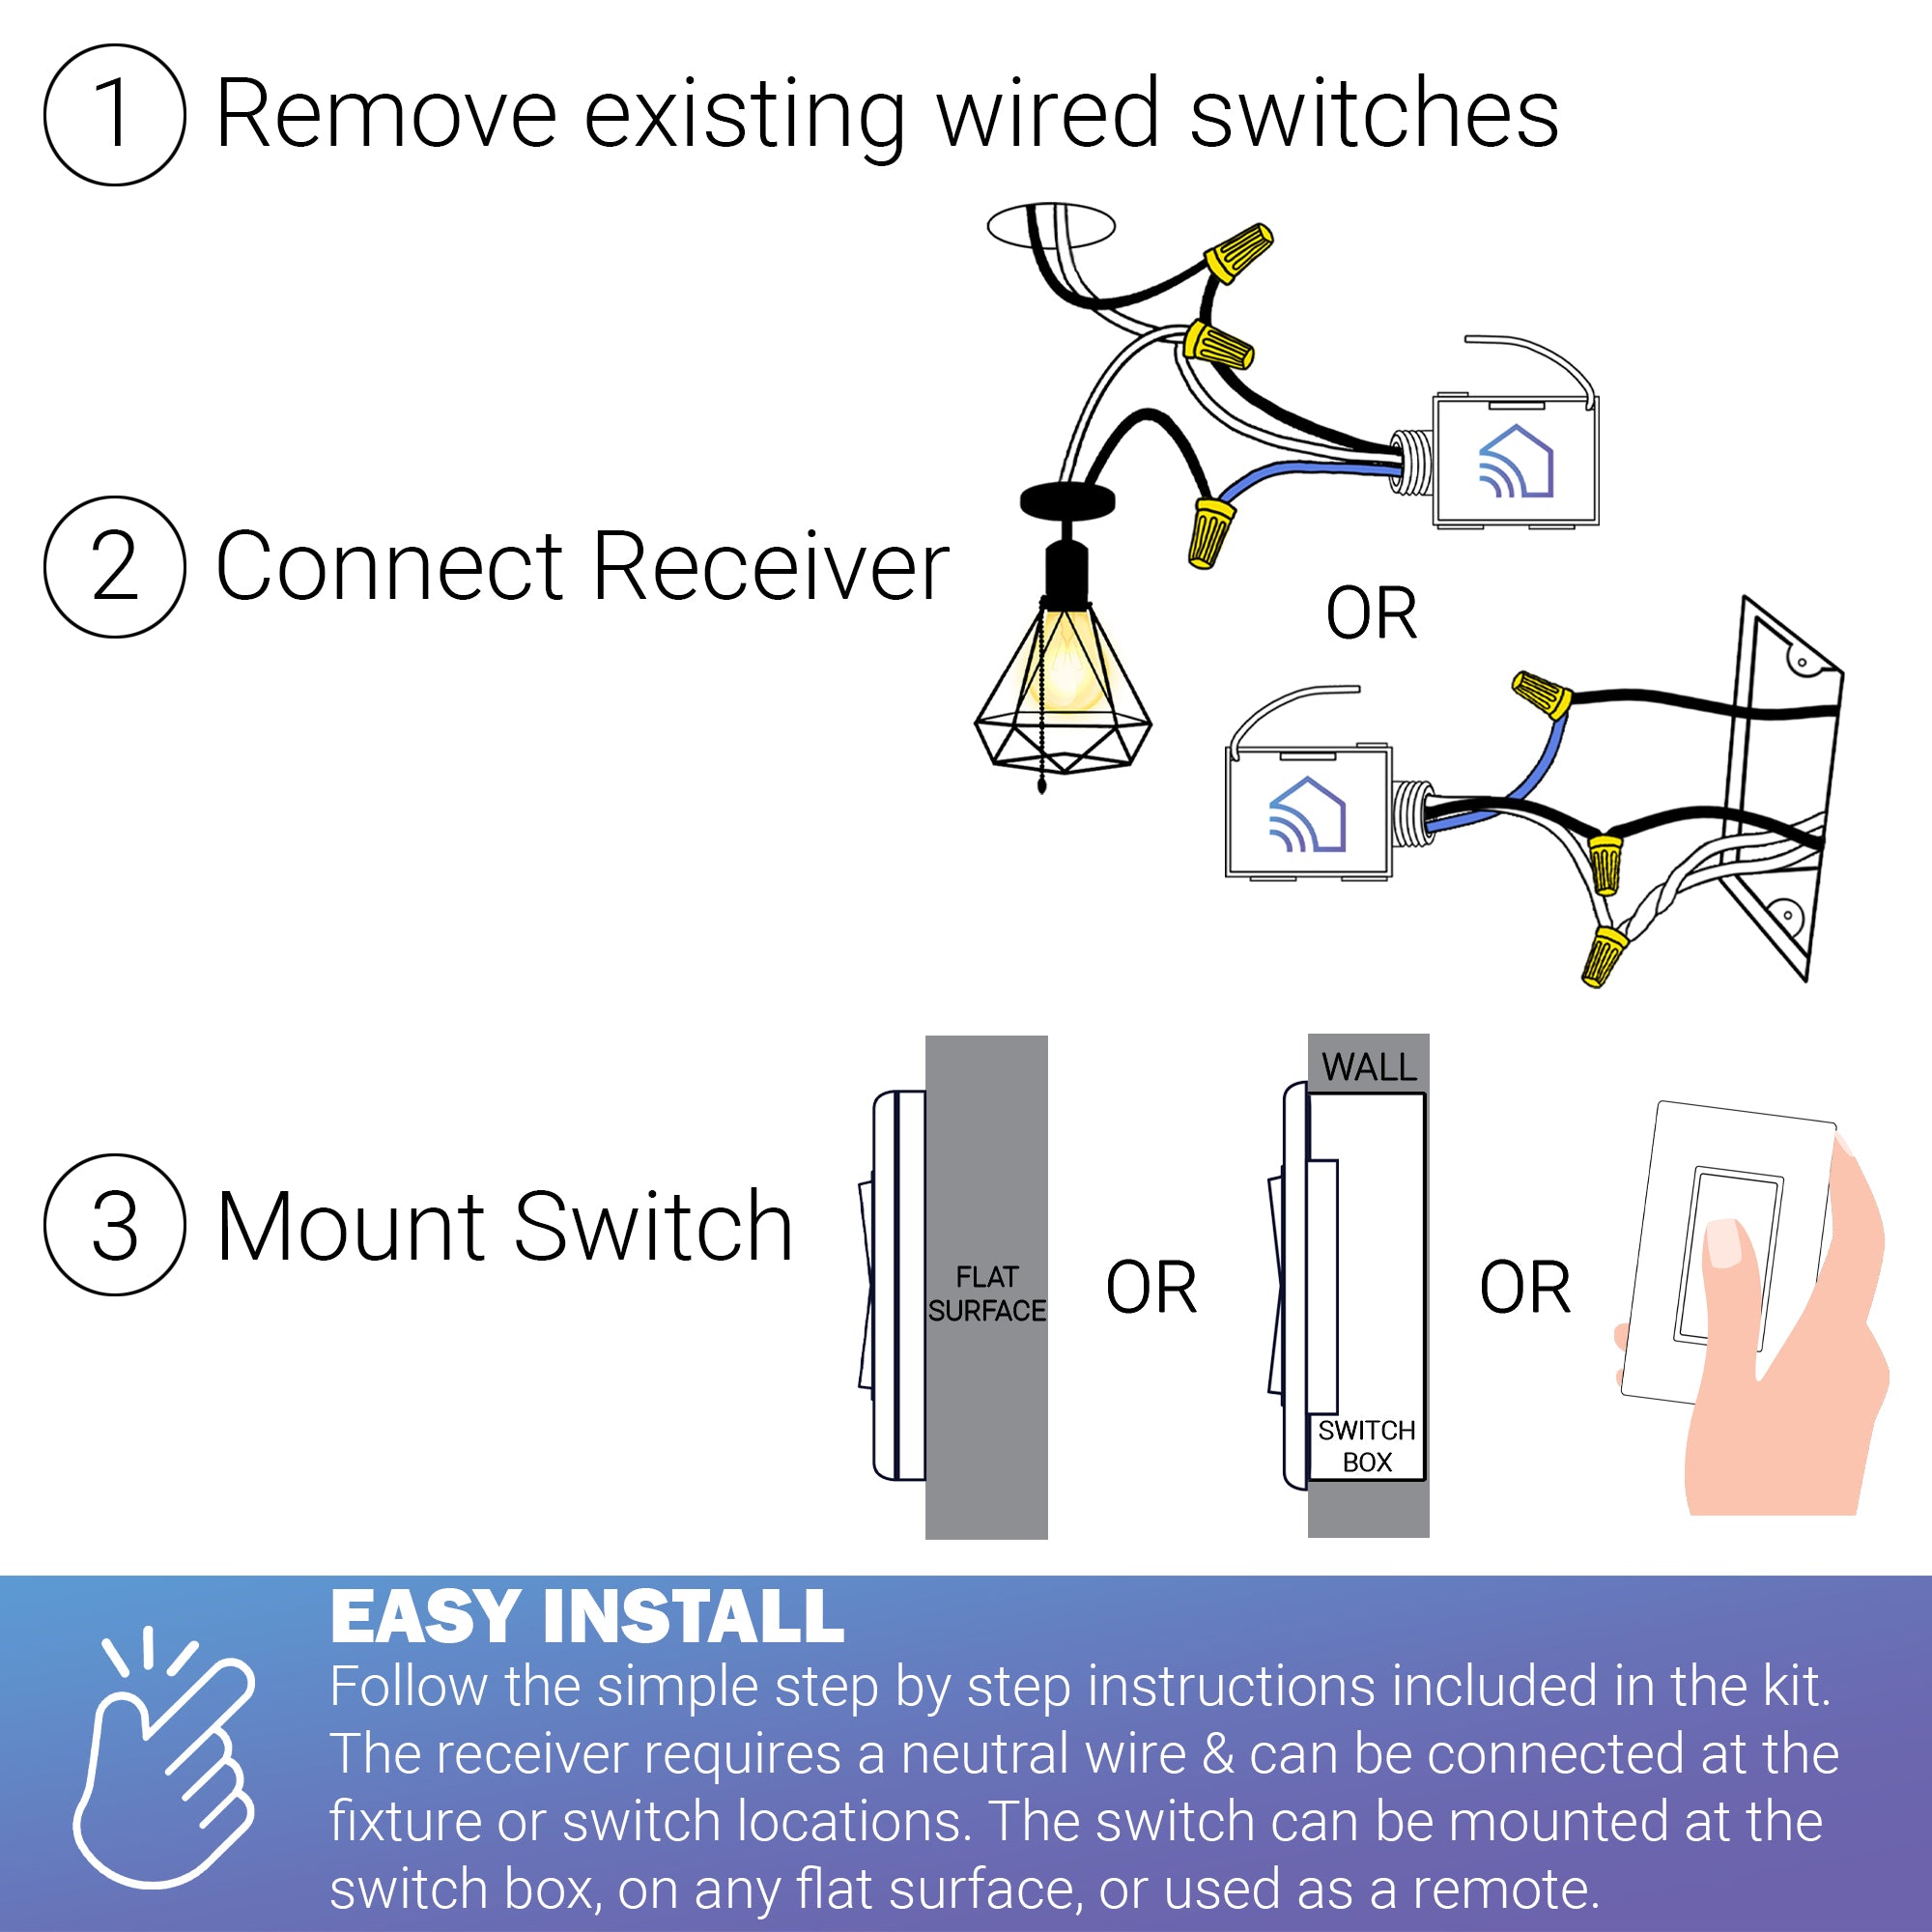 4-WAY KIT: 1 RECEIVER, 3 SWITCHES